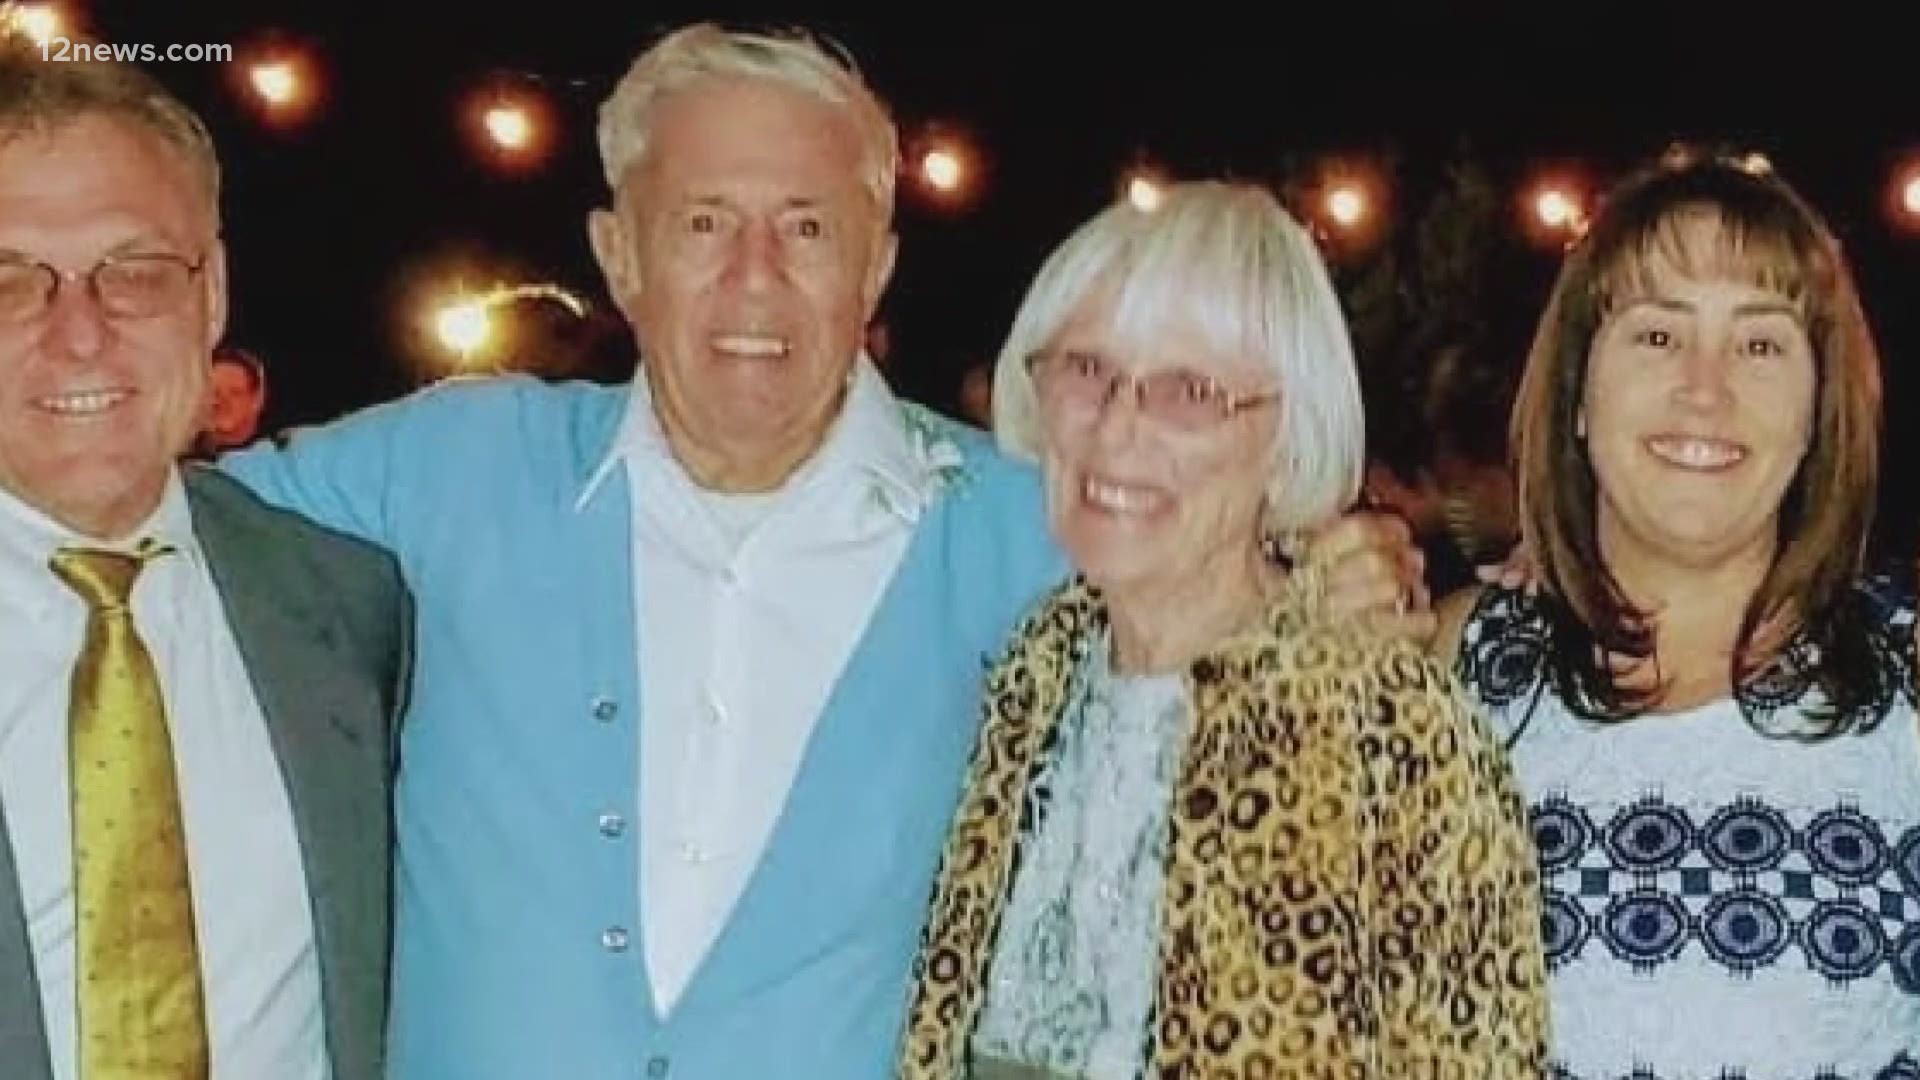 Arizona is seeing a rise in both coronavirus cases and hospitalizations. One Valley couple are both in the hospital as their 64th wedding anniversary approaches.